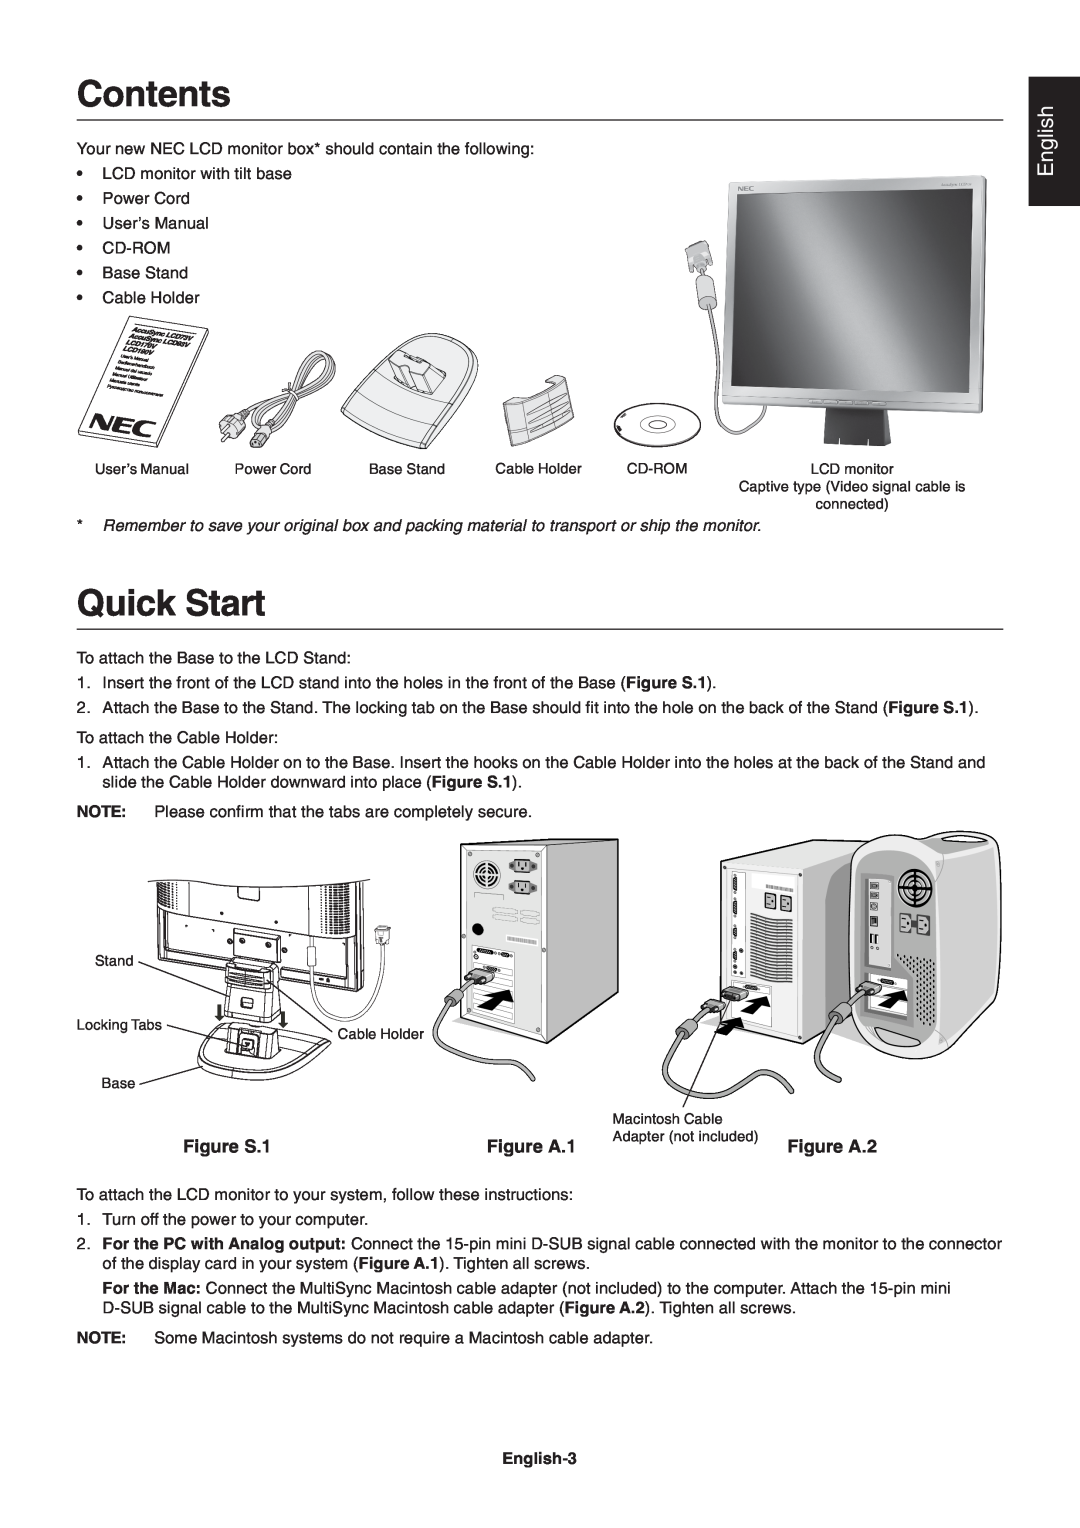 NEC LCD93V, LCD73V, LCD190V, LCD170V user manual Contents, Quick Start, Figure S.1, Figure A.1, Figure A.2, English-3 